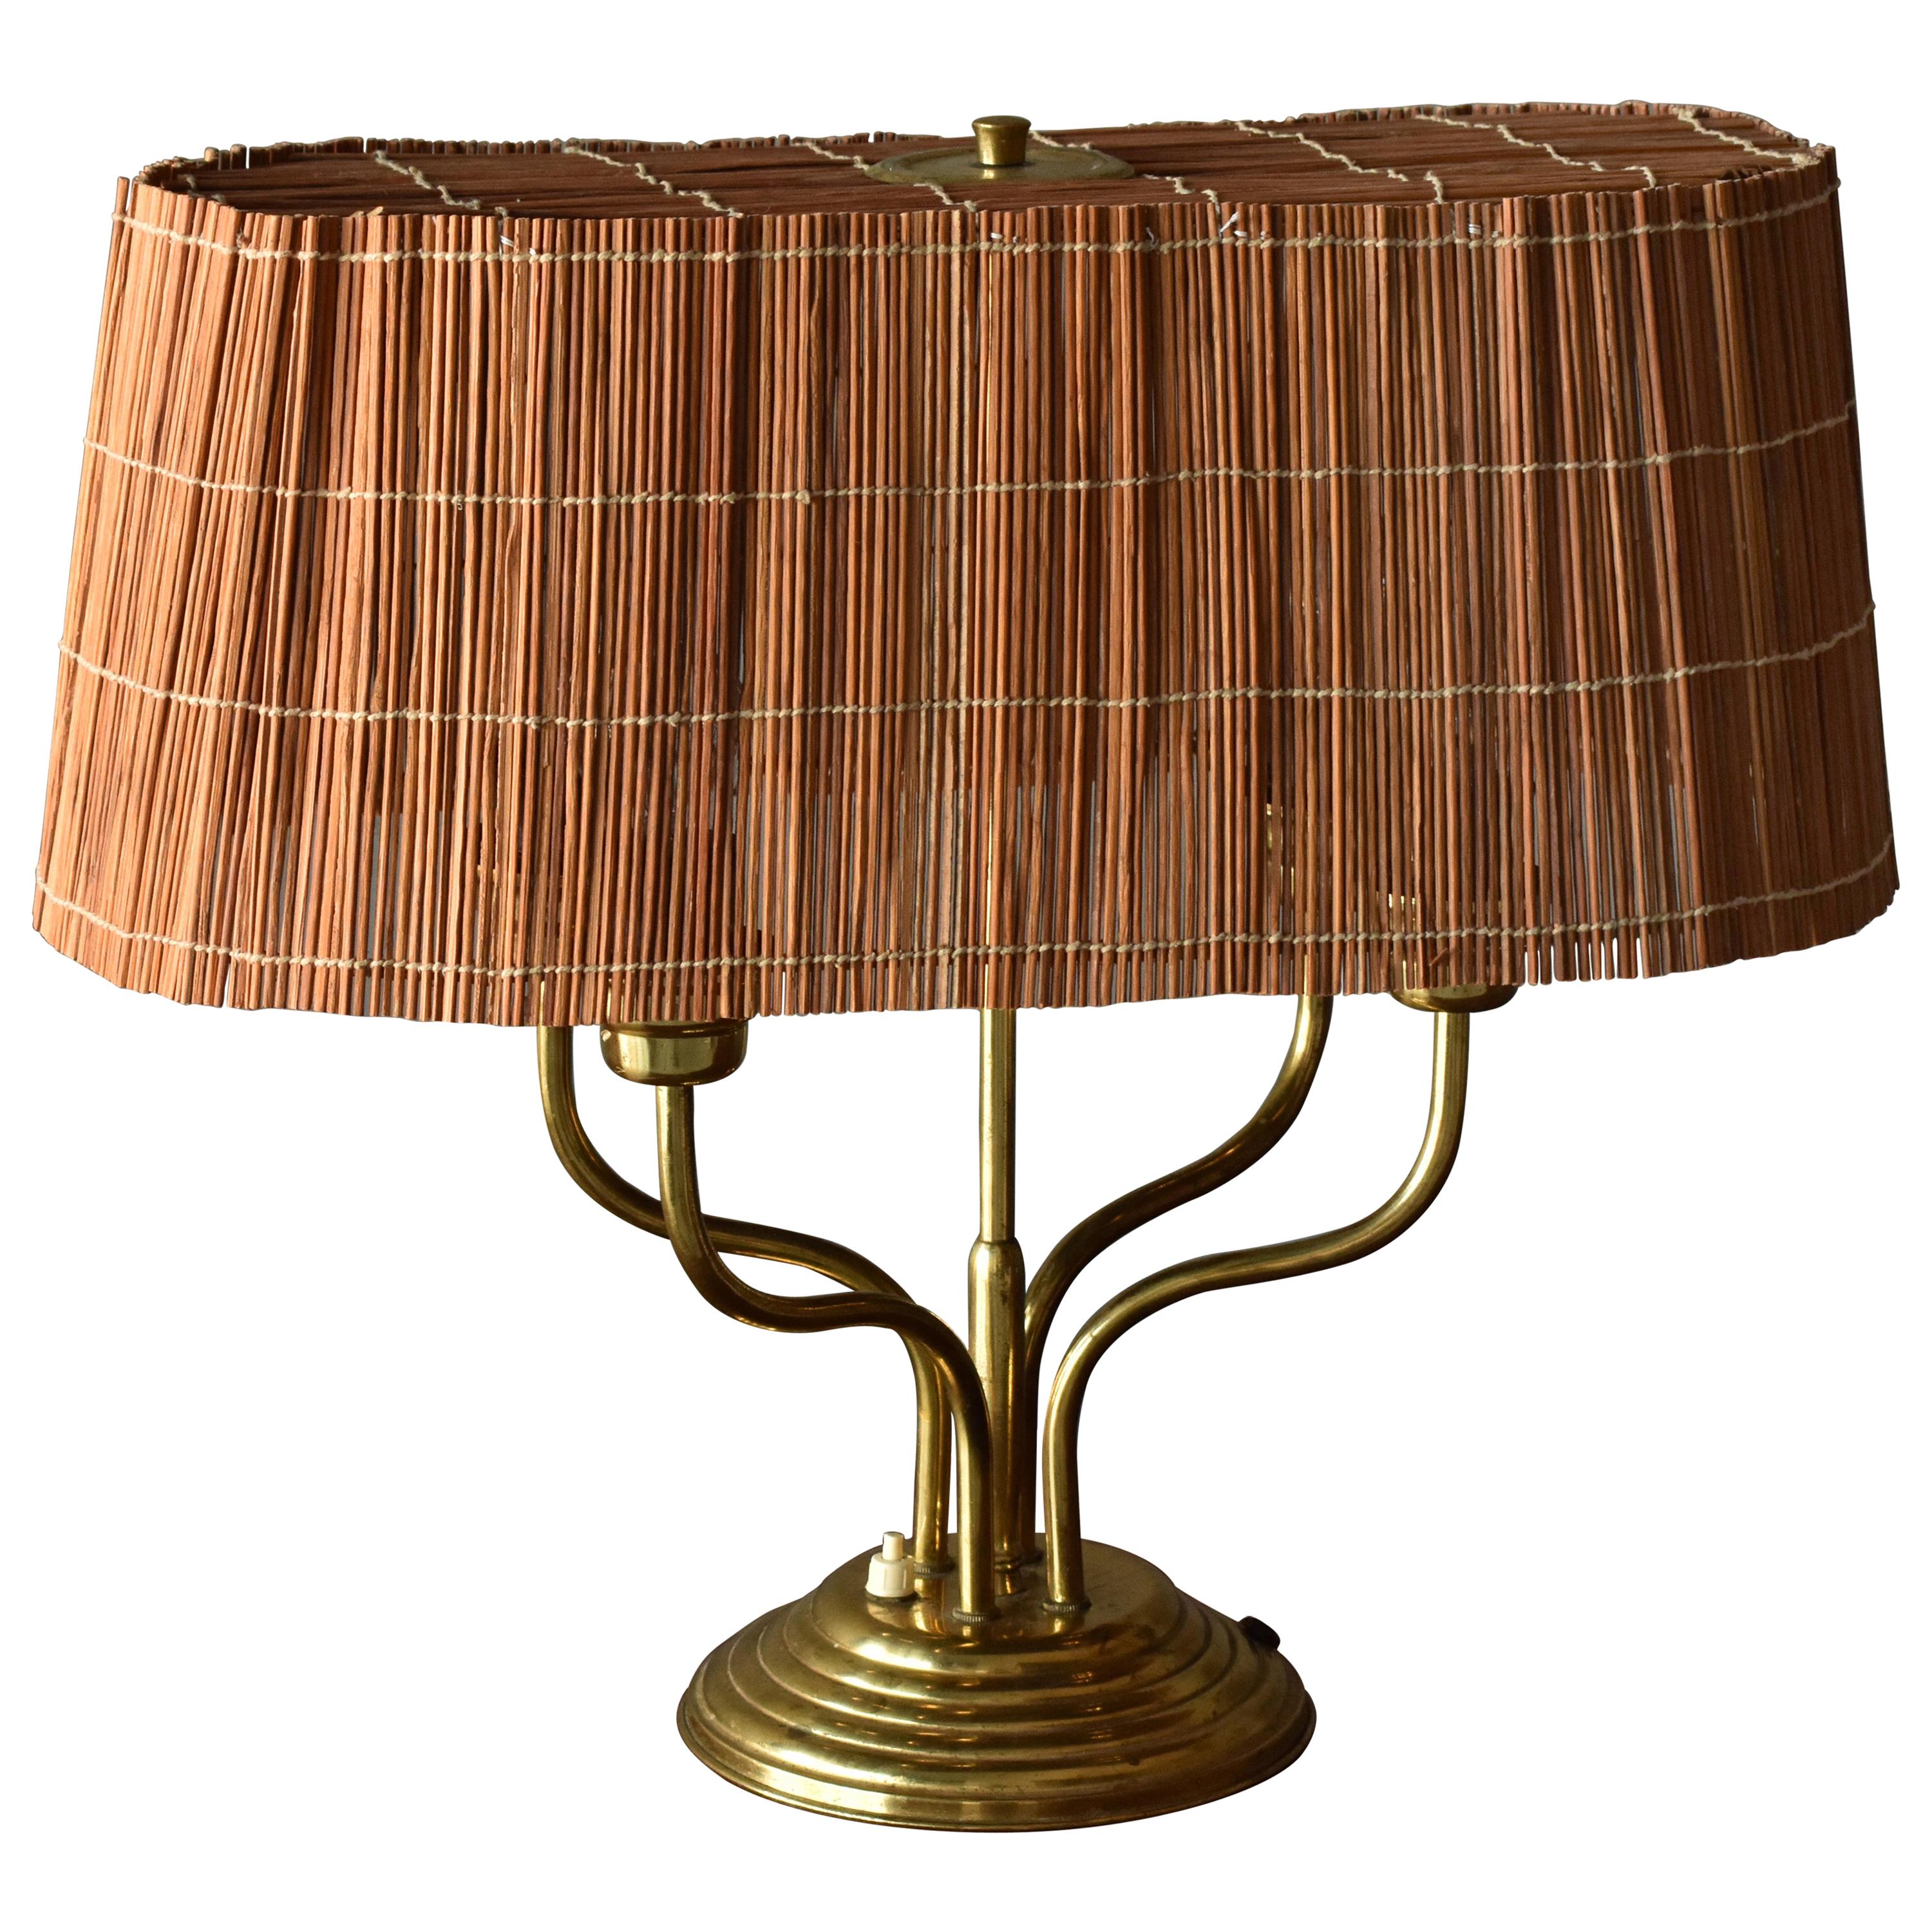 Itsu, Organic Modernist Four Armed Table Lamp, Brass, Reed, Finland, 1950s